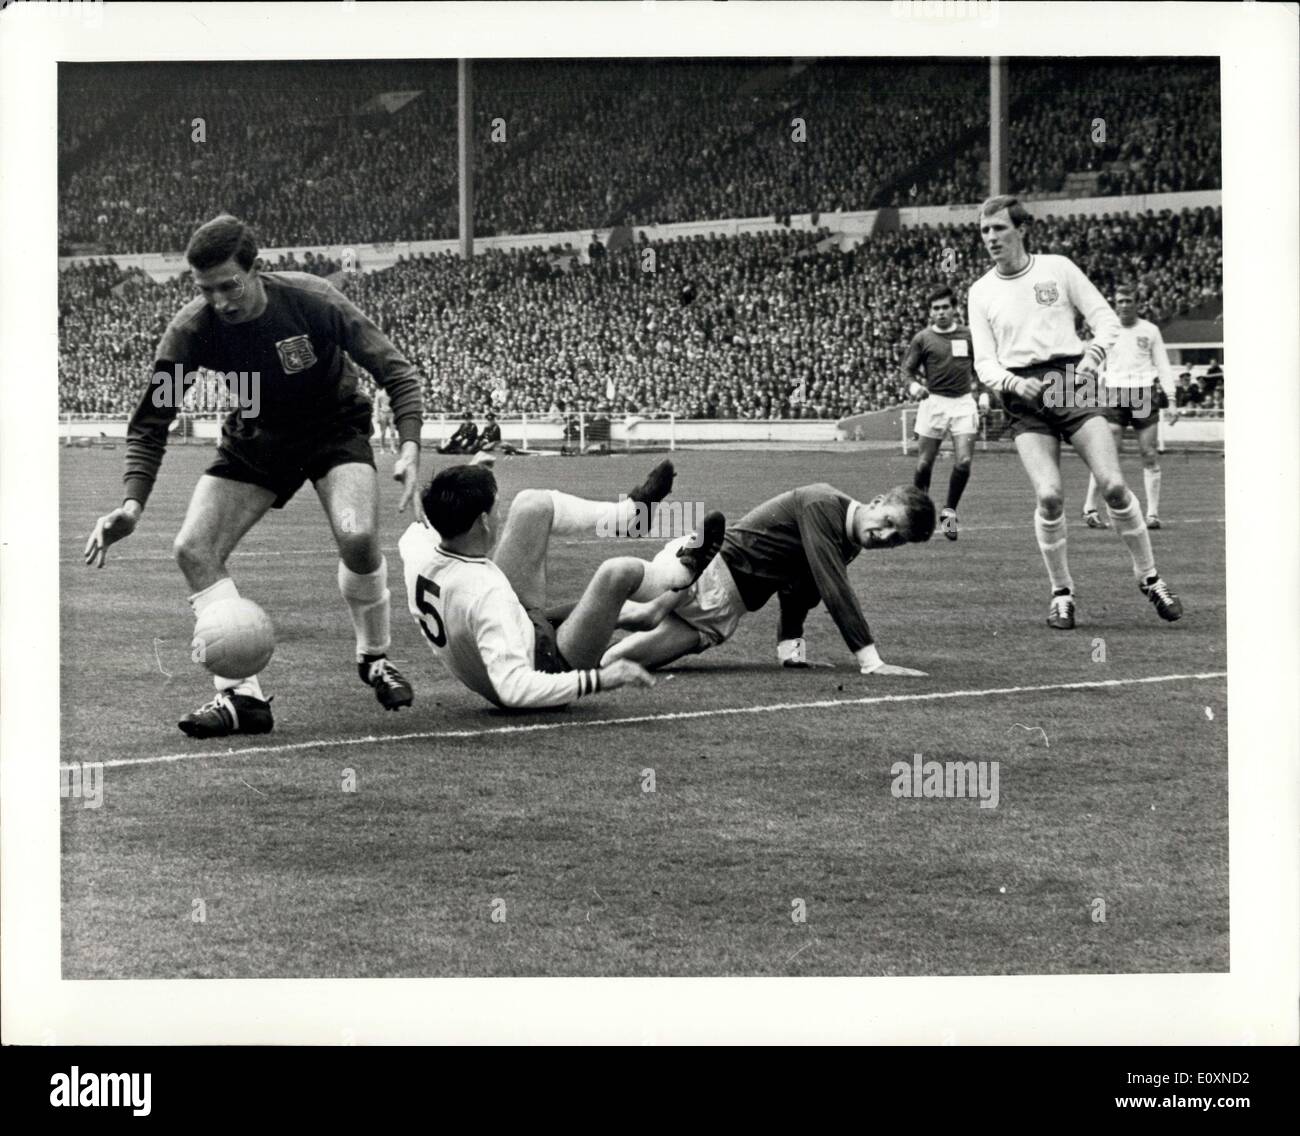 Apr. 22, 1967 - Amateur Cup Final: Enfield goalkeeper Ian Wolstenholem gathers the ball from temmates Alf D'arcy (left, Captain) and Howard Moxton (right) and Skelmersdale United player Wally Bennett (center) during an attack on the enfiled goal in their Amateur cup final at Wembley stadium, London, today, April 22. Enfield drew 0-0 with Skelmersdale after extra time. Stock Photo